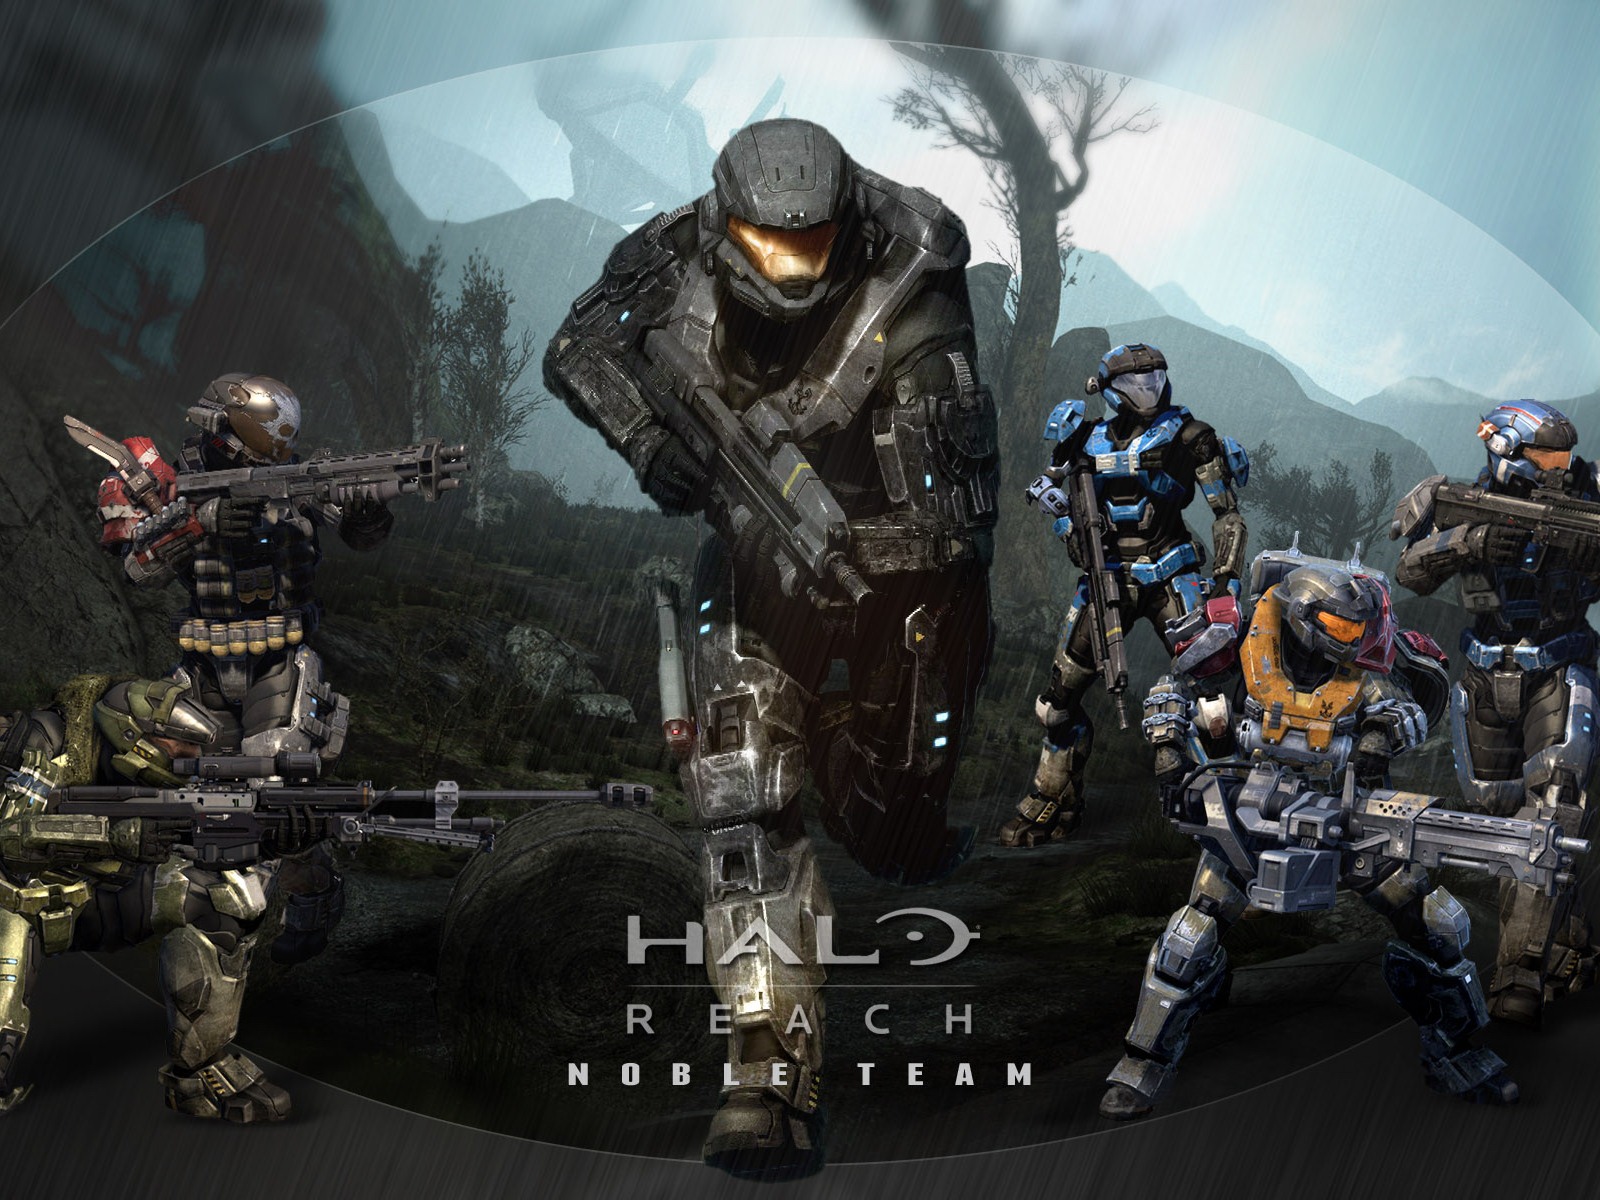 Halo game HD wallpapers #23 - 1600x1200